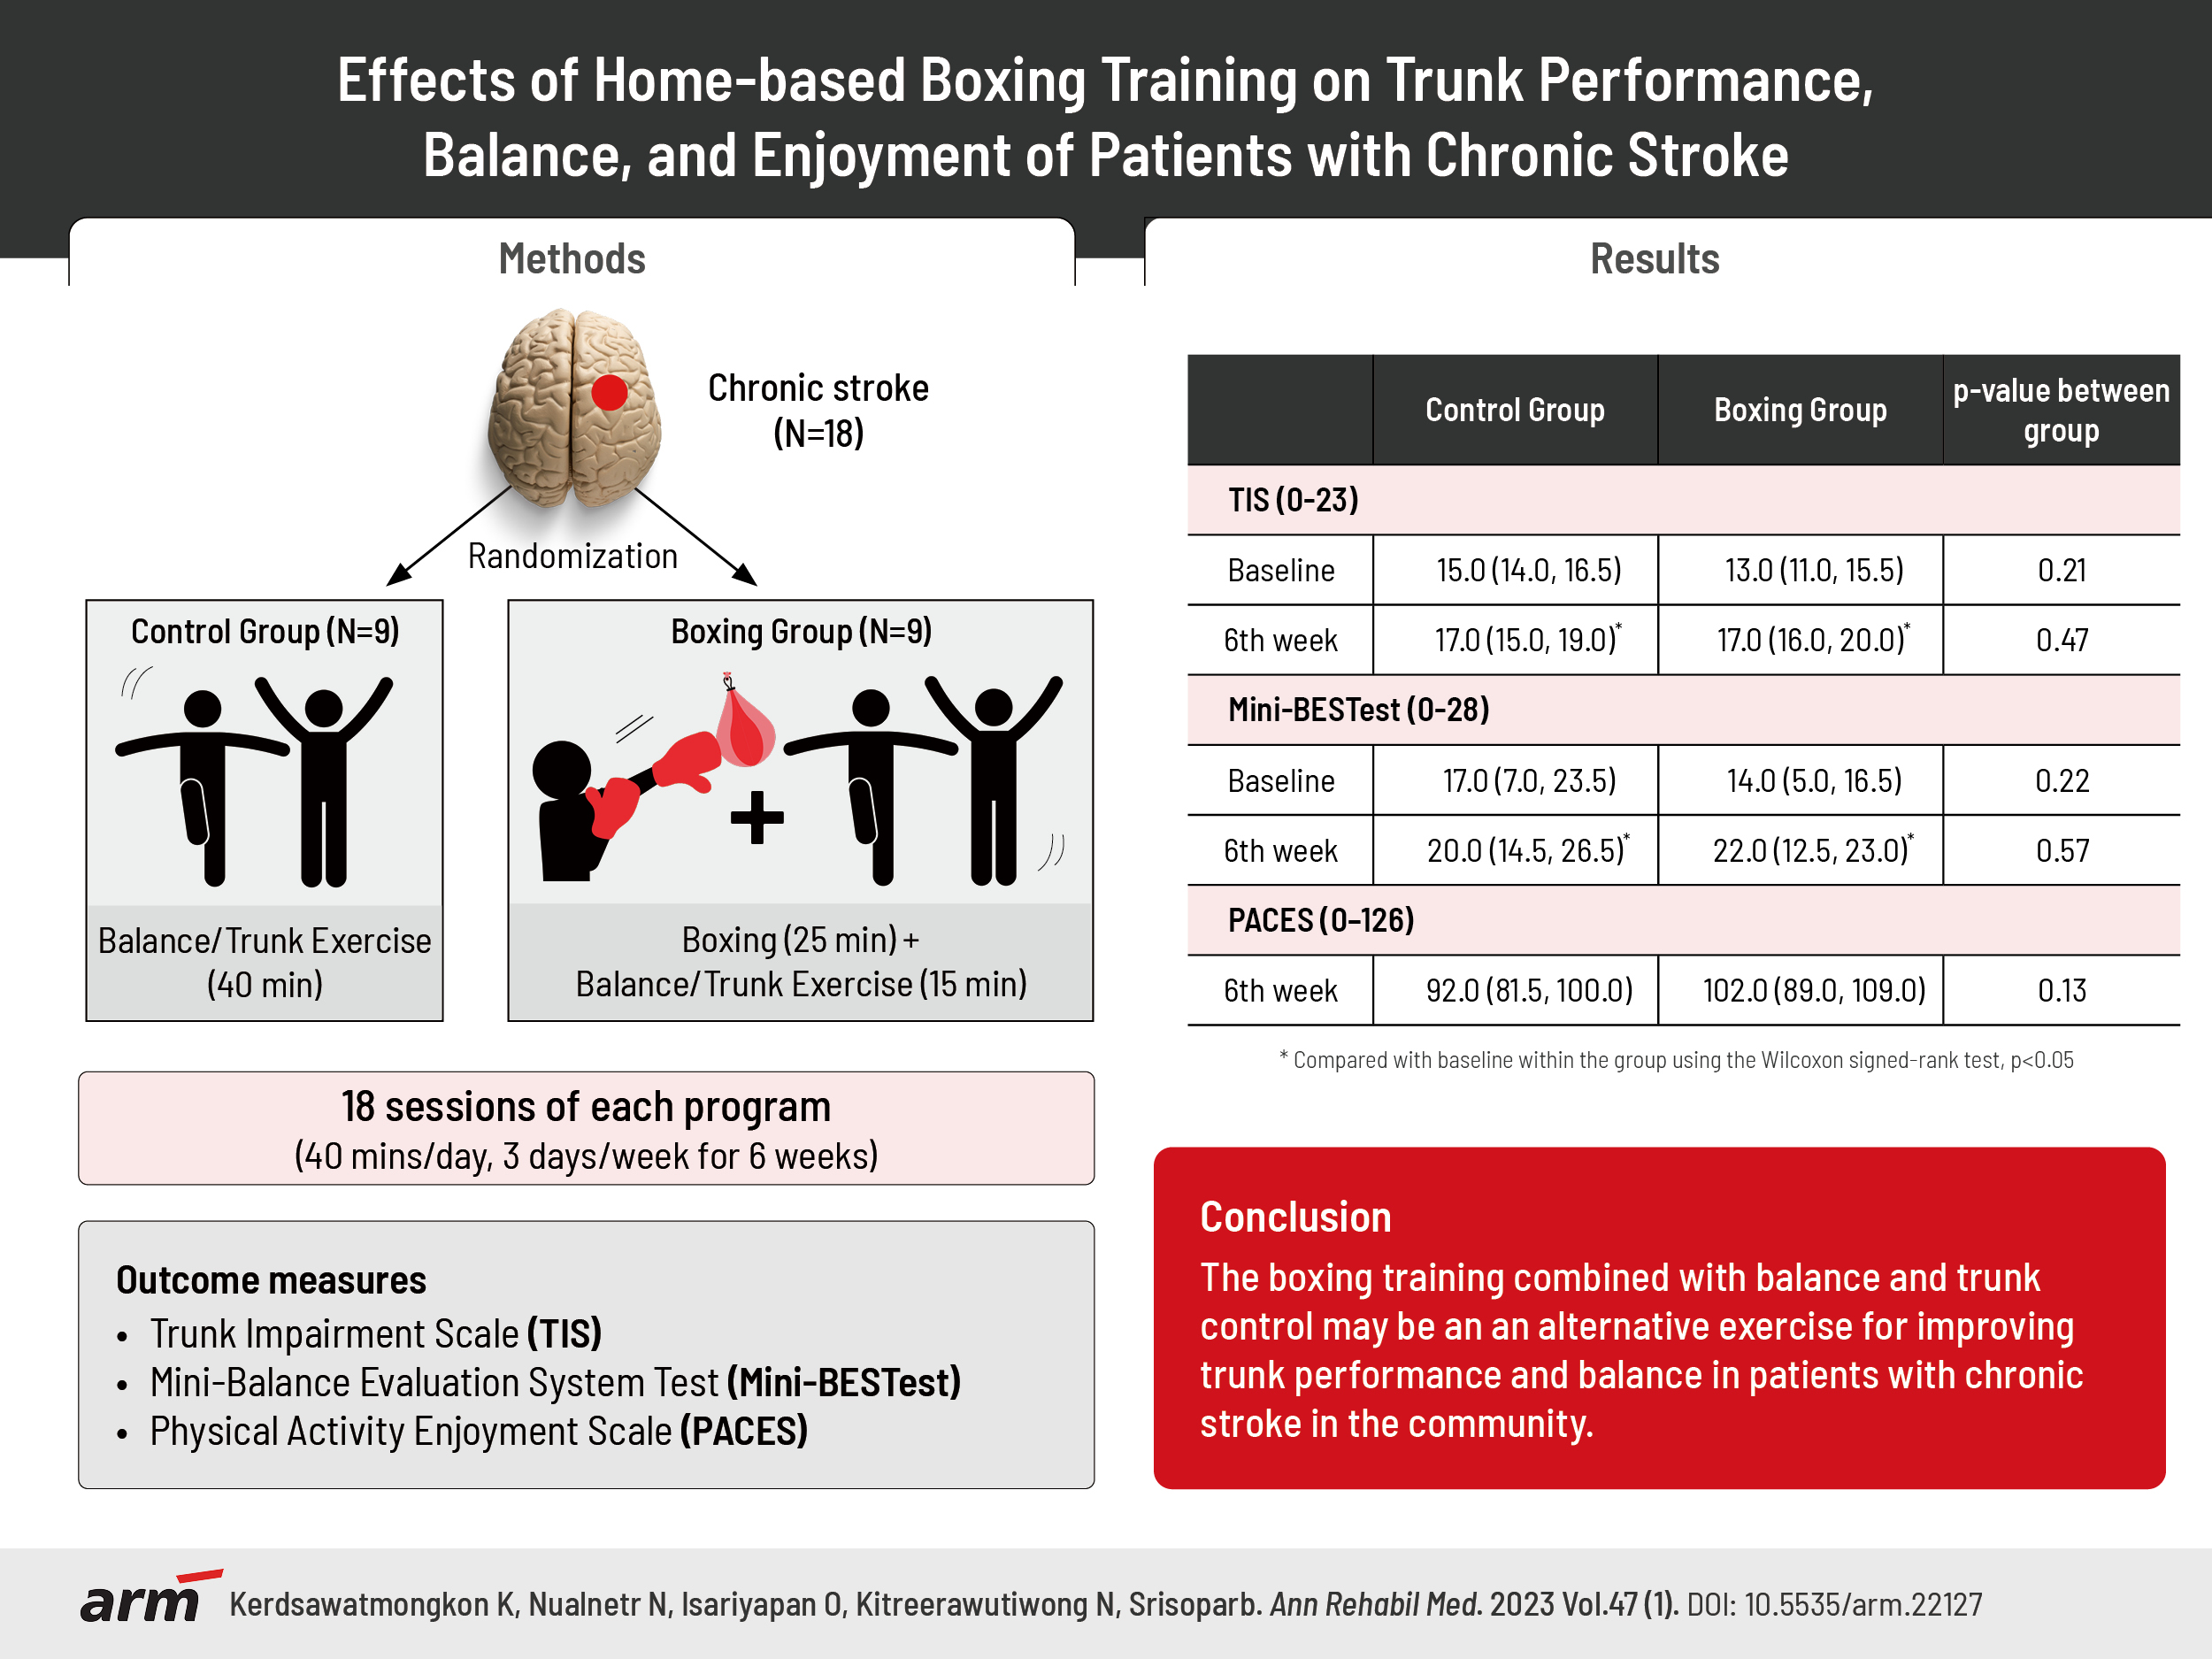 Effects of Home-Based Boxing Training on Trunk Performance, Balance, and Enjoyment of Patients With Chronic Stroke